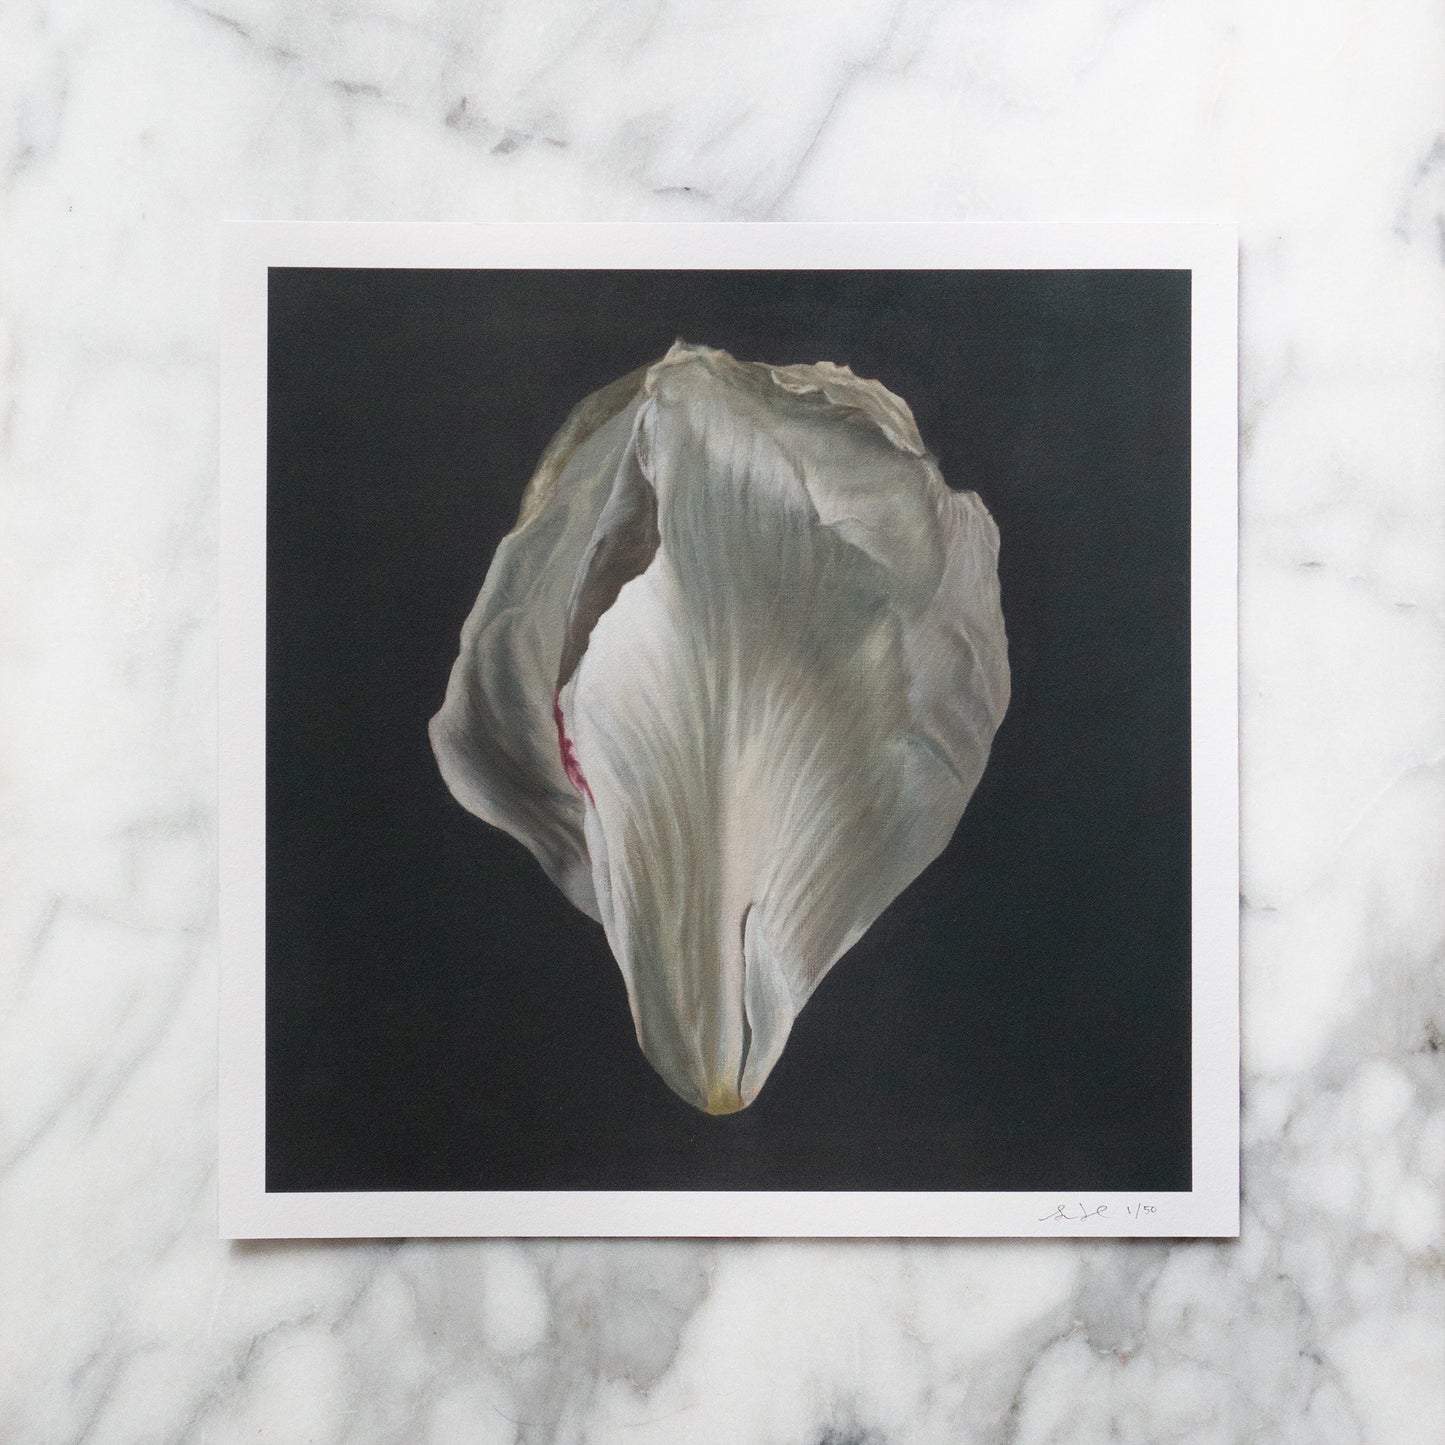 Load image into Gallery viewer, Set of 2 Peony Petals Limited Edition Prints - Dark 1
